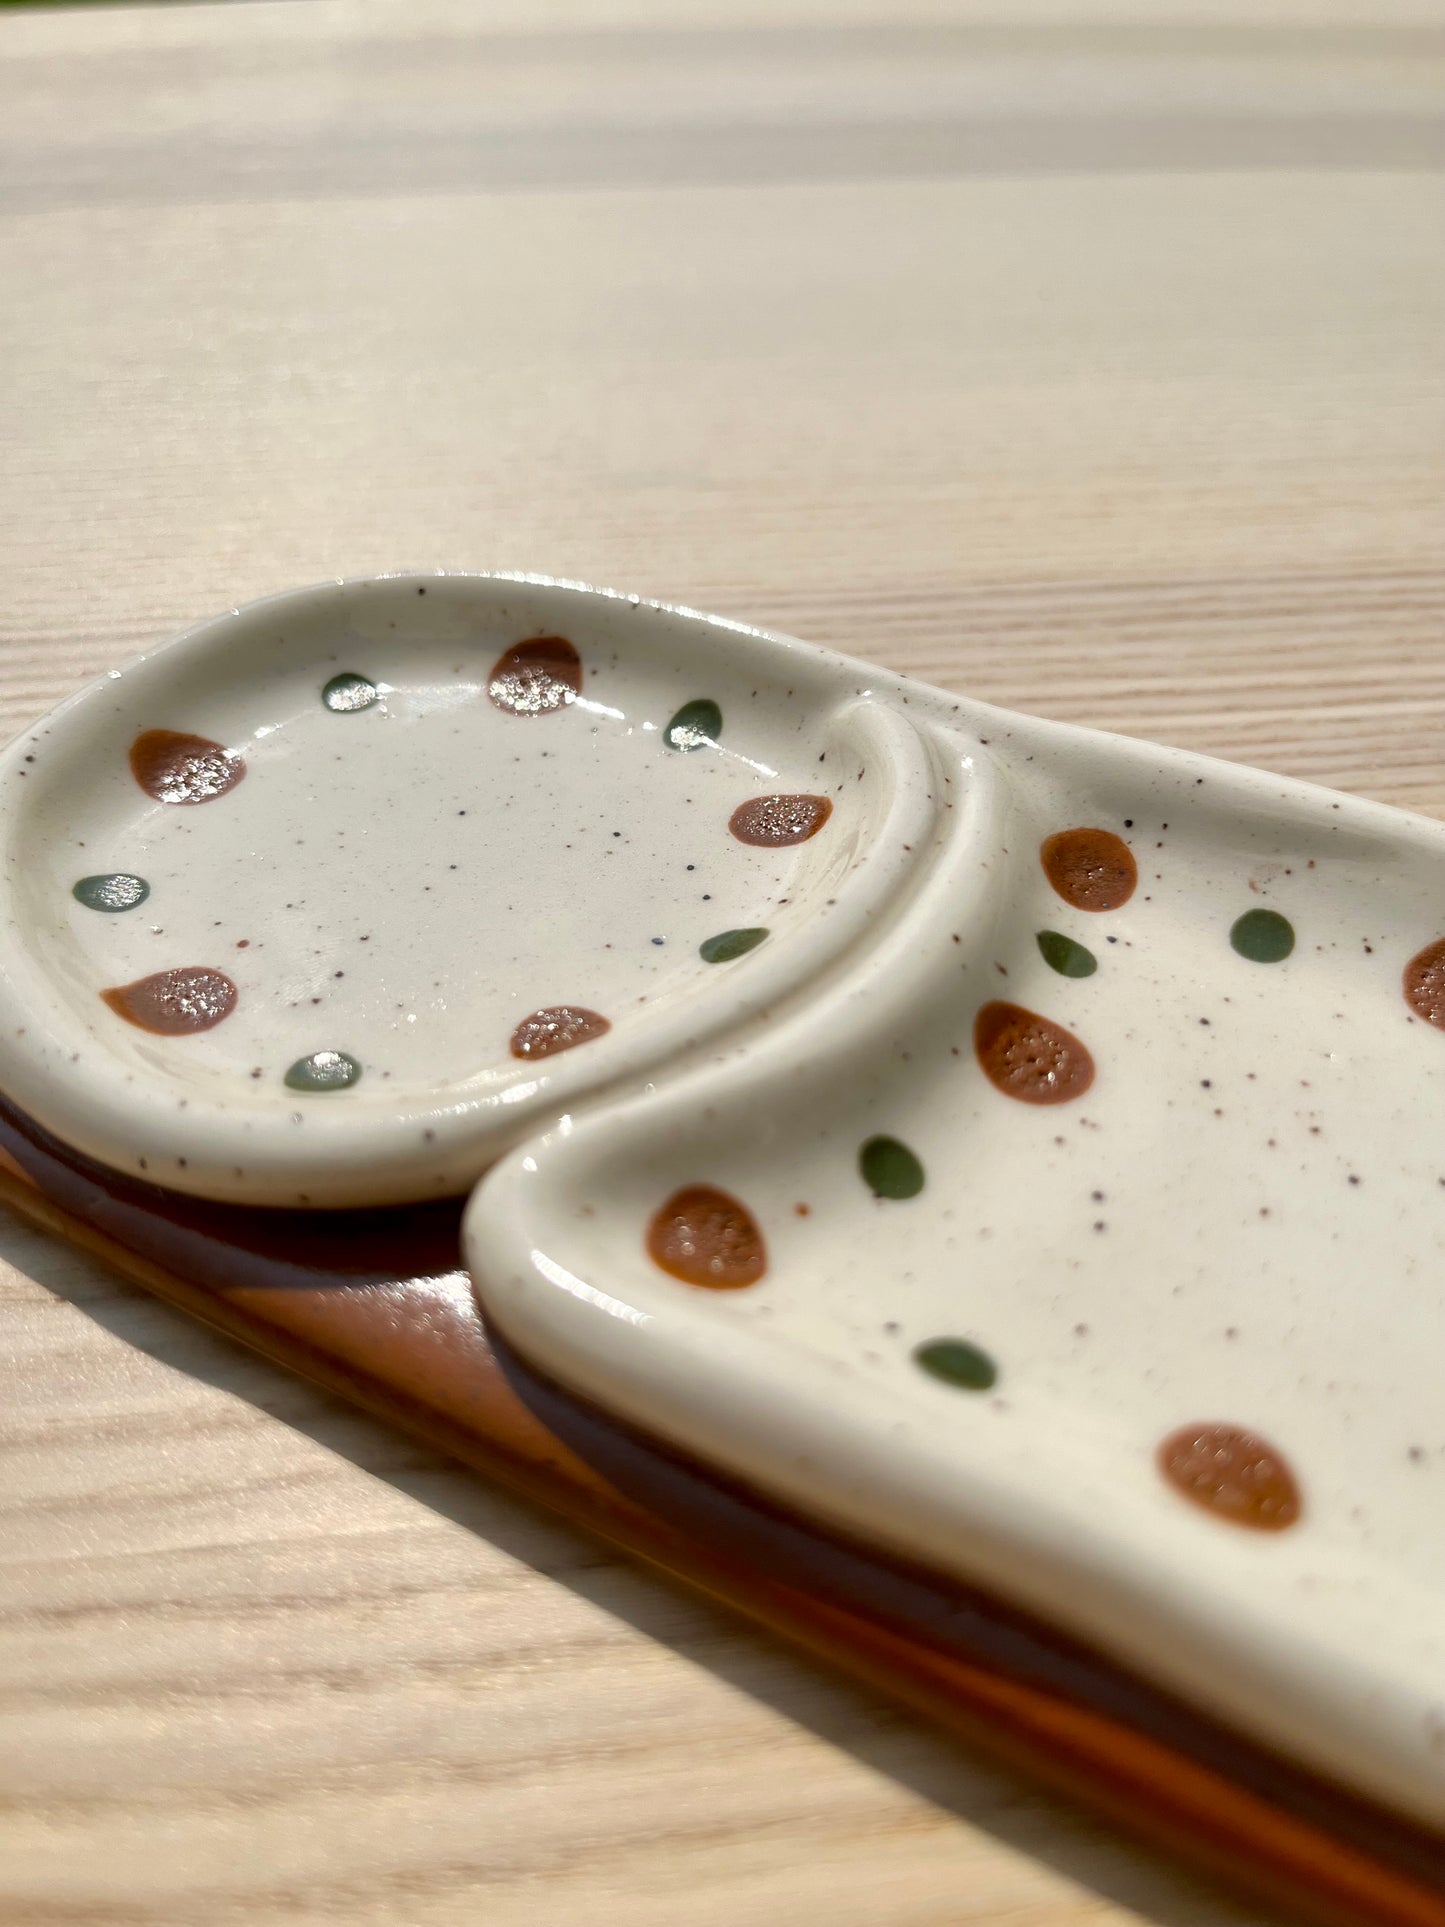 Long Brown & Green Spotted Dish